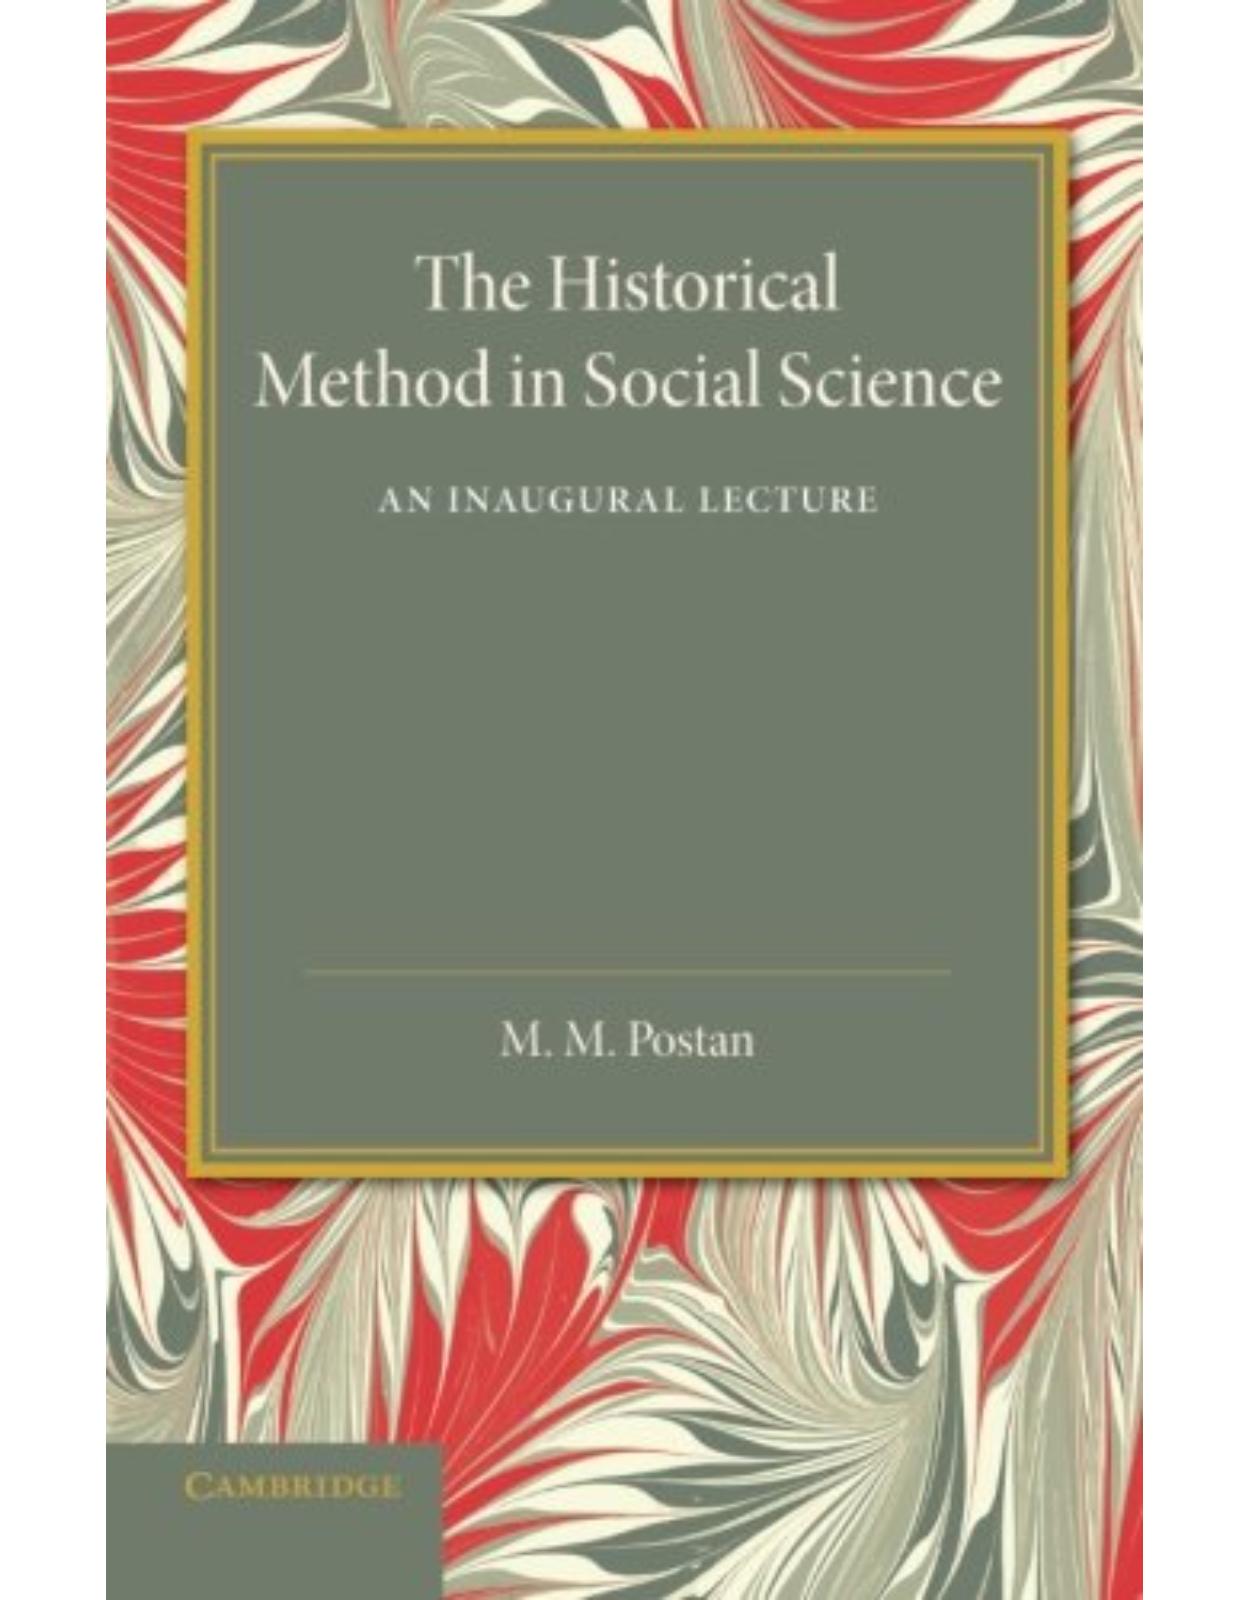 The Historical Method in Social Science: An Inaugural Lecture